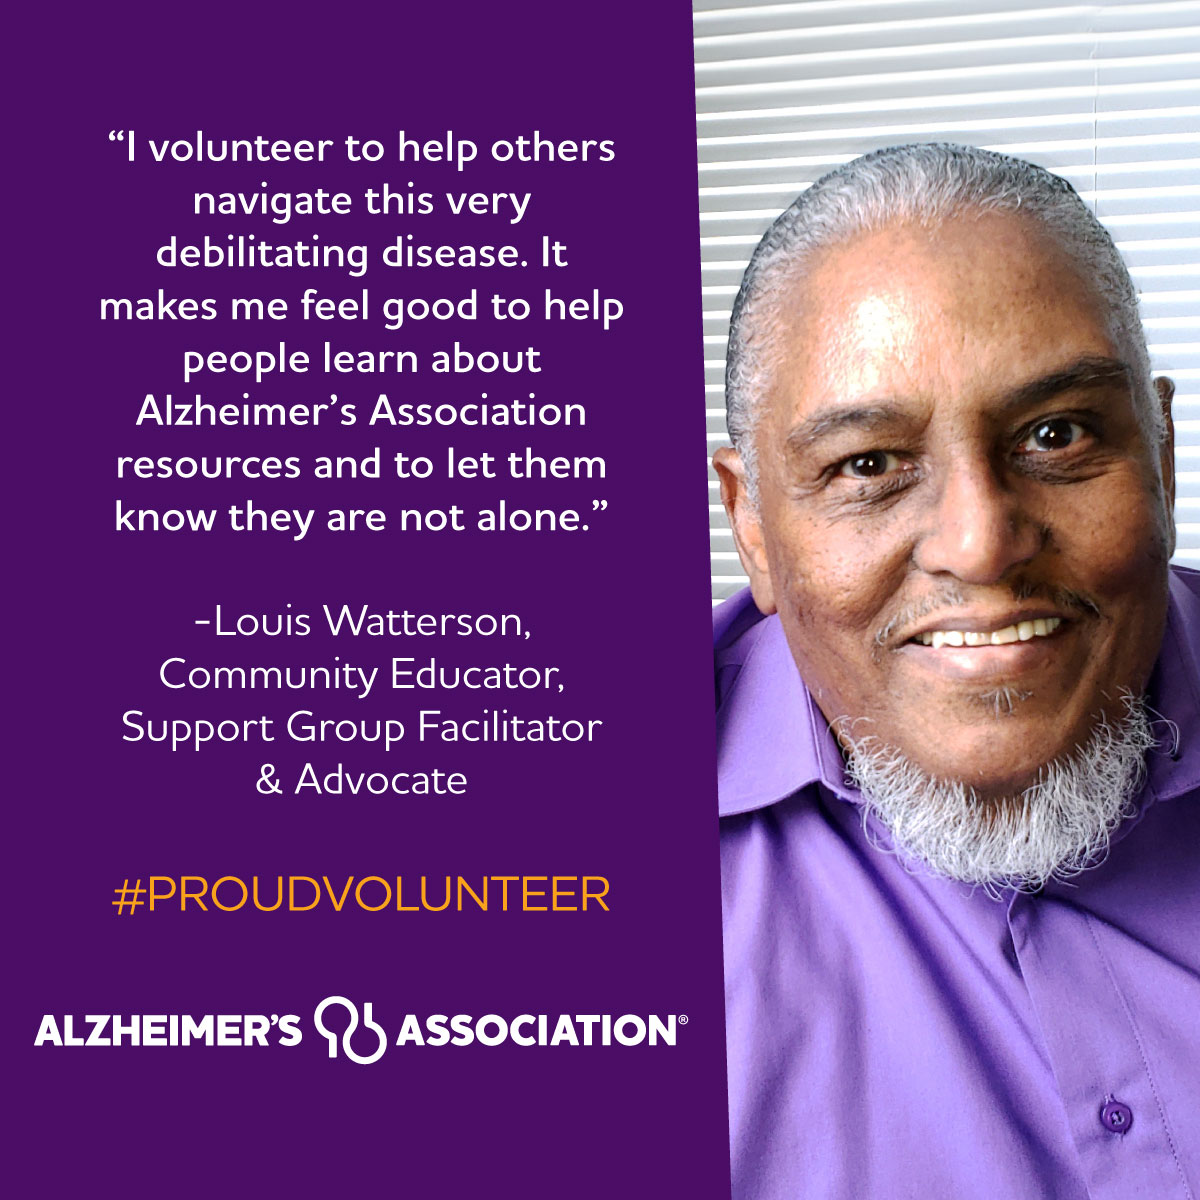 We are grateful for volunteers like Louis who provide education and support opportunities for families navigating Alzheimer’s and other dementia. Volunteers like Louis are a beacon for those facing Alzheimer’s and other dementia. #NationalVolunteerWeek #ENDALZ